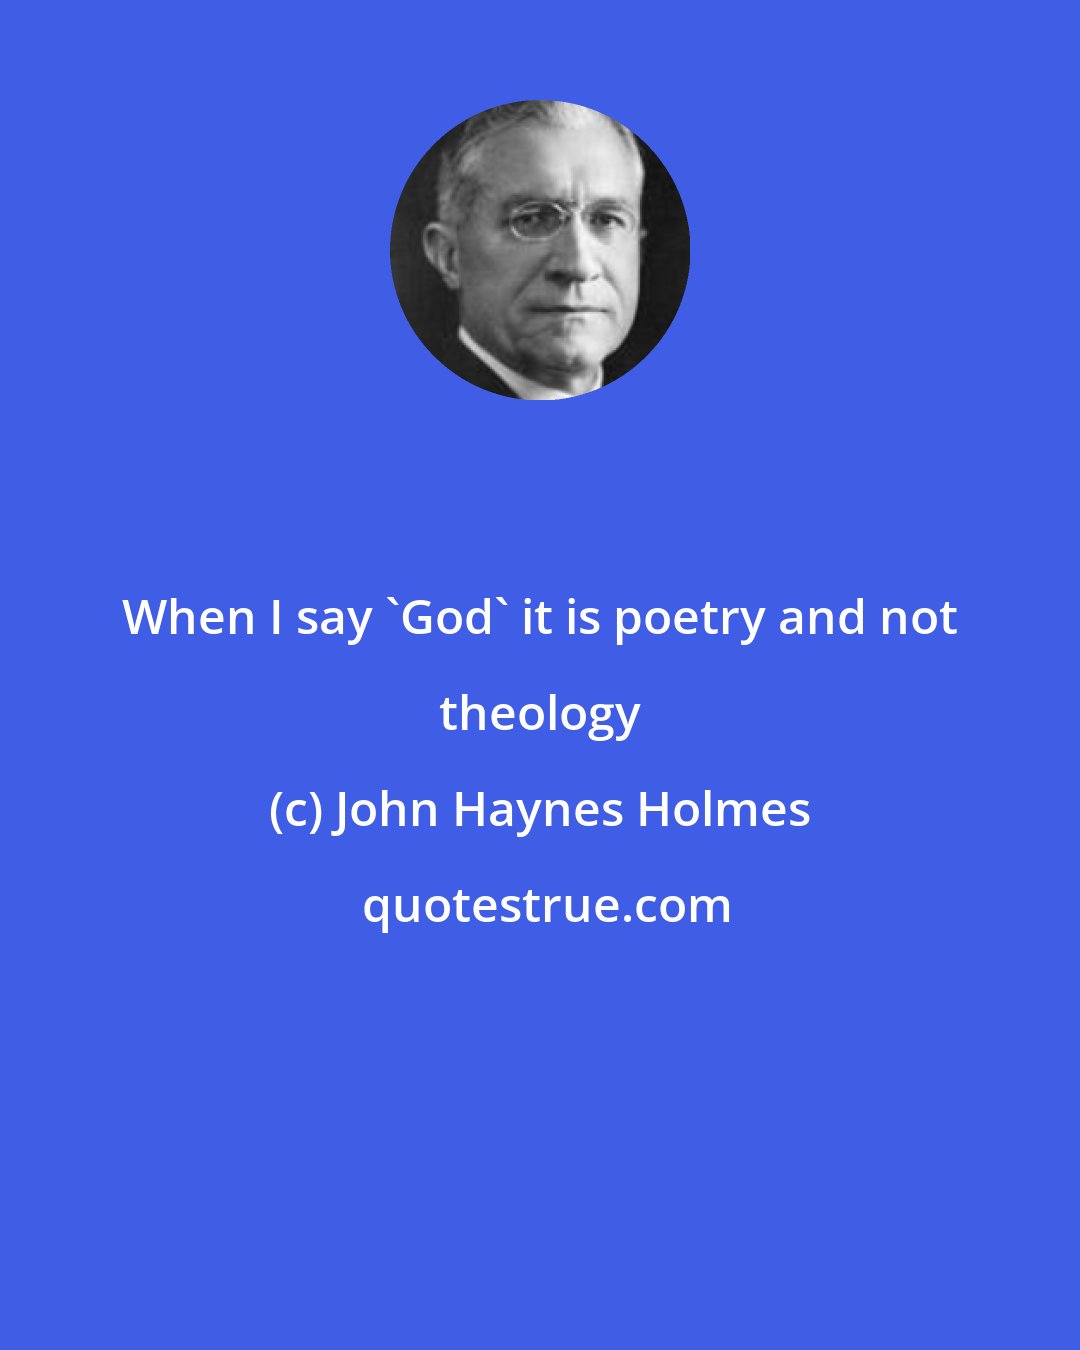 John Haynes Holmes: When I say 'God' it is poetry and not theology